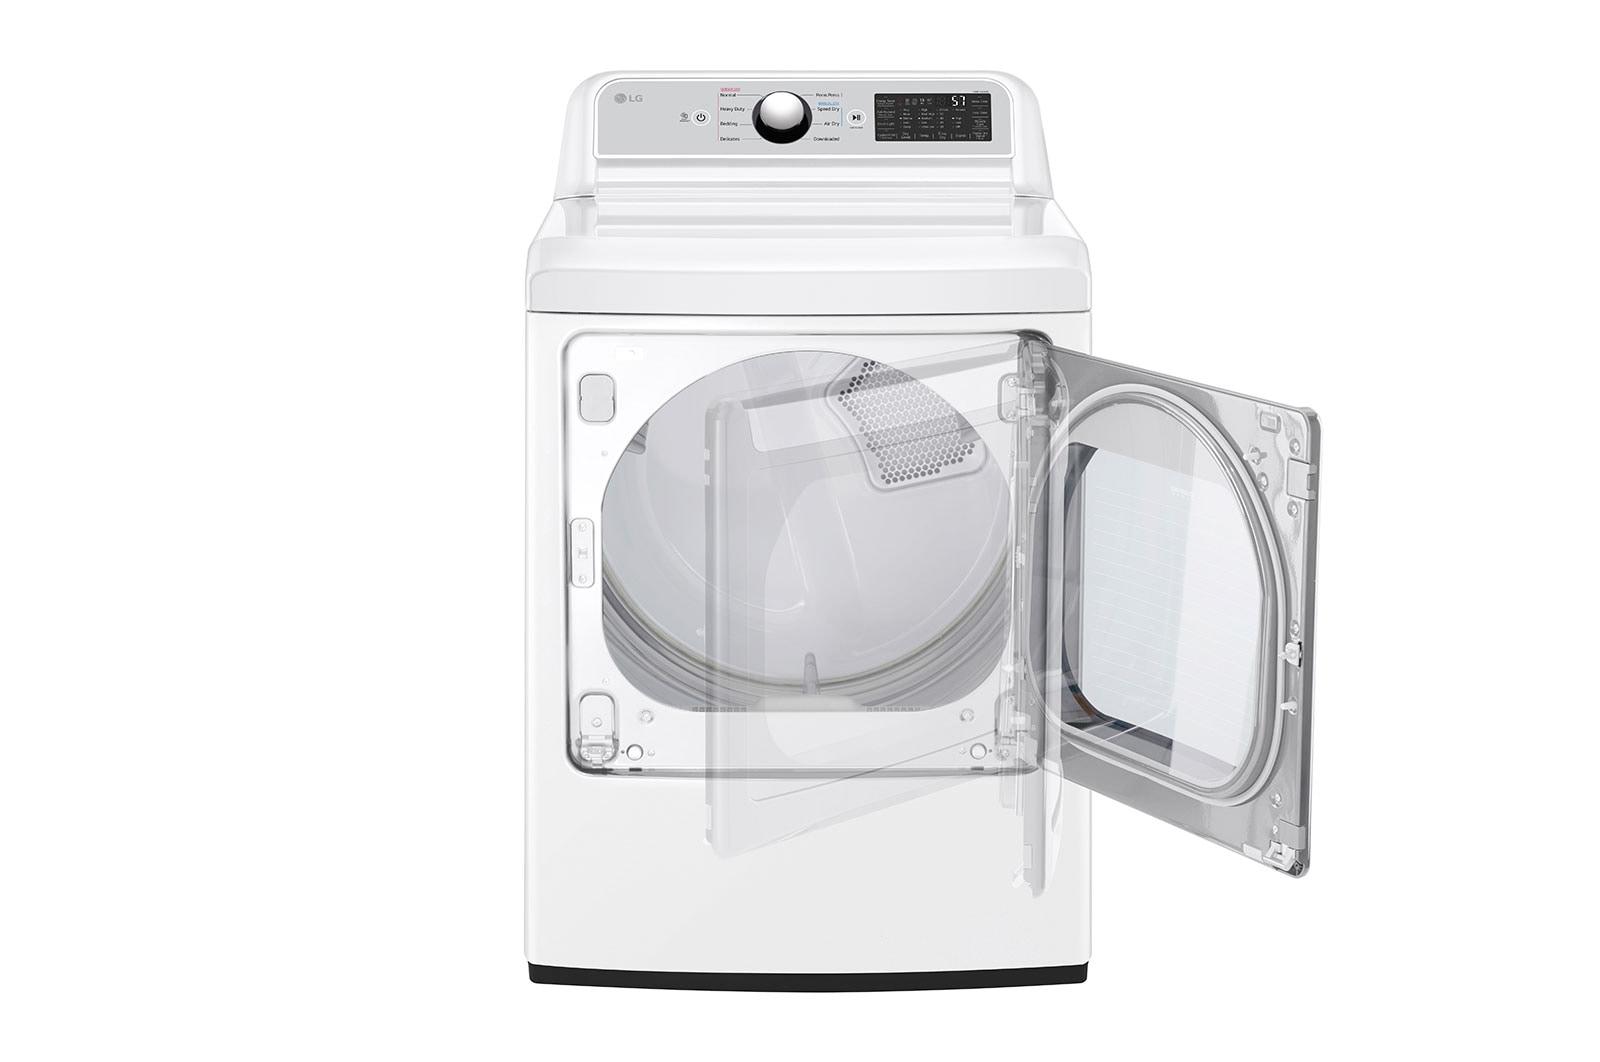 Lg DLG7401WE 7.3 Cu. Ft. Ultra Large Capacity Smart Wi-Fi Enabled Rear Control Gas Dryer With Easyload™ Door